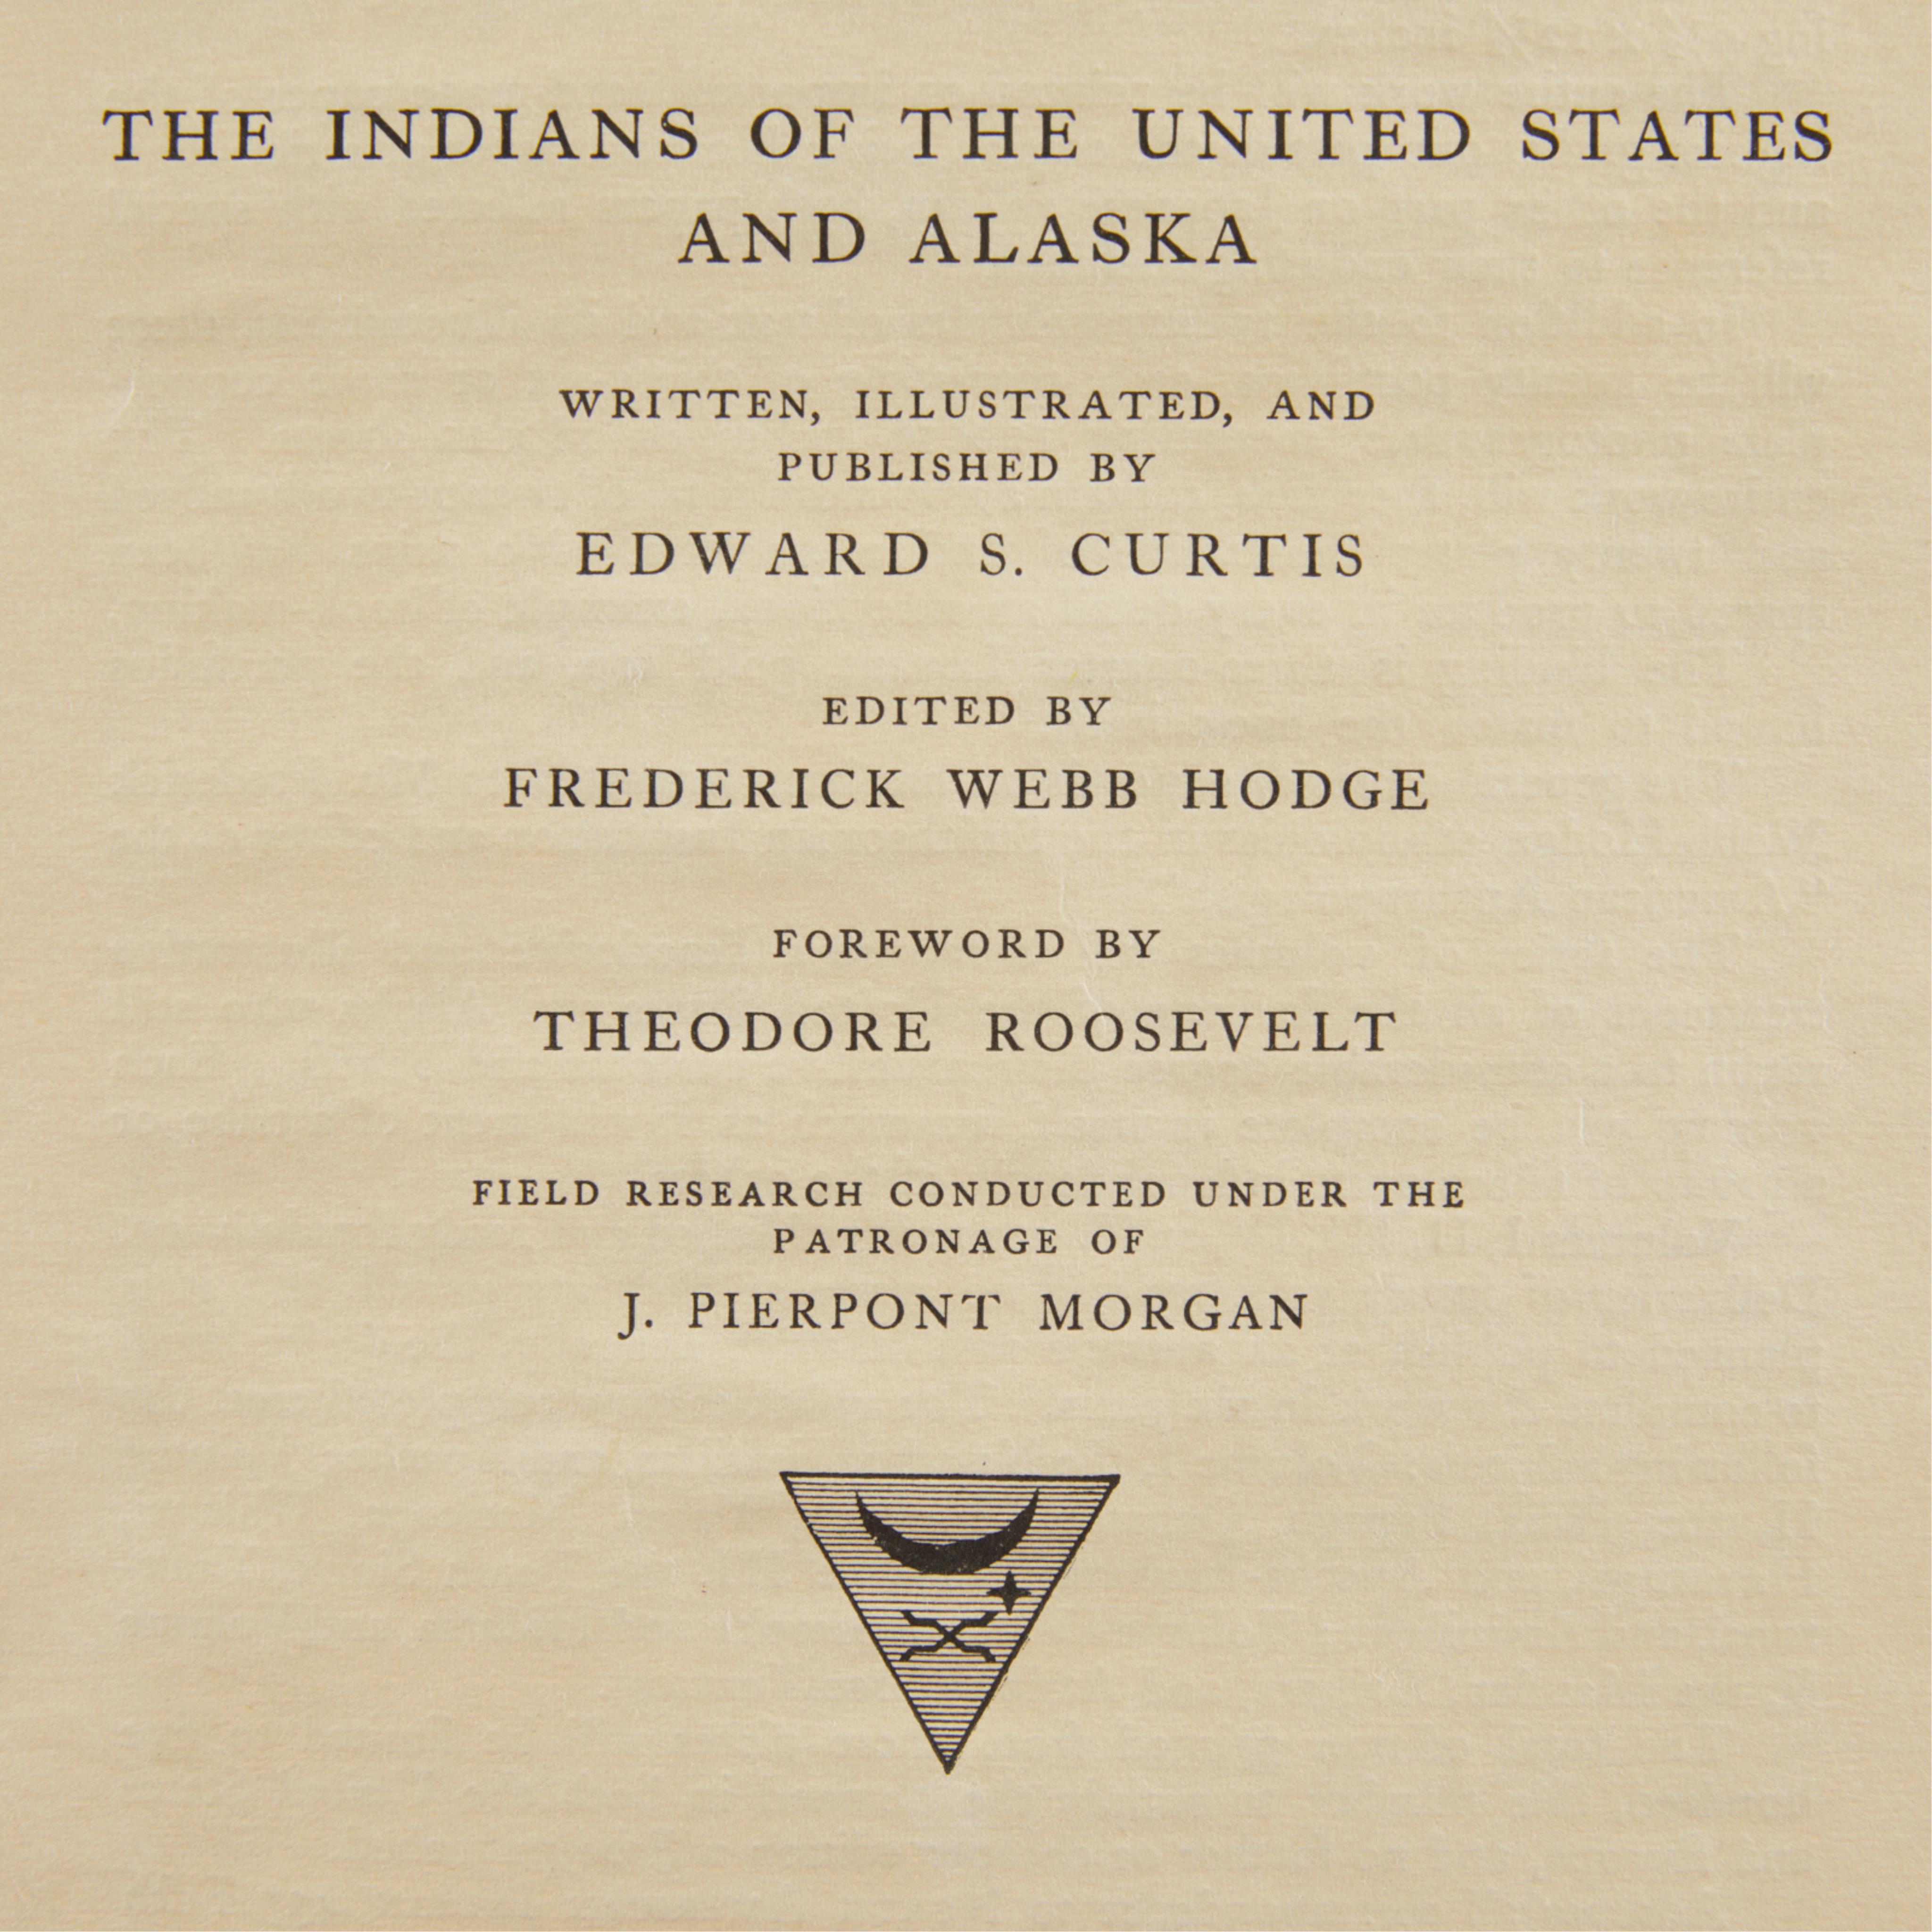 "The N. American Indian" Sample Signed Roosevelt - Image 11 of 11